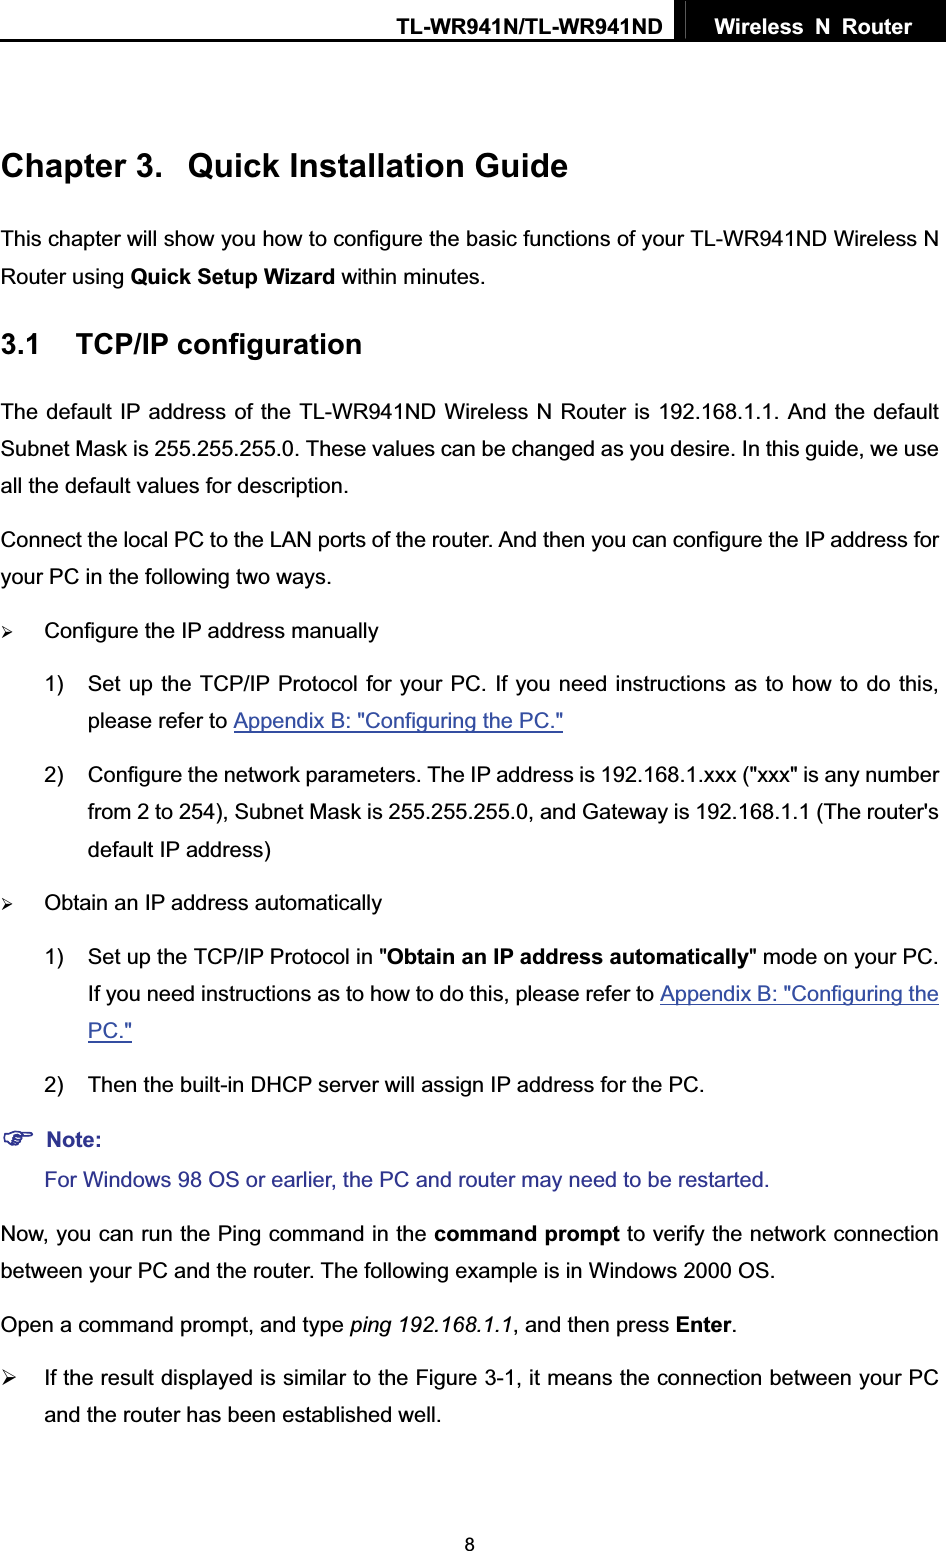 TL-WR941N/TL-WR941ND  Wireless N Router  8Chapter 3.  Quick Installation Guide This chapter will show you how to configure the basic functions of your TL-WR941ND Wireless N Router using Quick Setup Wizard within minutes. 3.1 TCP/IP configuration The default IP address of the TL-WR941ND Wireless N Router is 192.168.1.1. And the default Subnet Mask is 255.255.255.0. These values can be changed as you desire. In this guide, we use all the default values for description. Connect the local PC to the LAN ports of the router. And then you can configure the IP address for your PC in the following two ways. ¾Configure the IP address manually 1)  Set up the TCP/IP Protocol for your PC. If you need instructions as to how to do this, please refer to Appendix B: &quot;Configuring the PC.&quot;2)  Configure the network parameters. The IP address is 192.168.1.xxx (&quot;xxx&quot; is any number from 2 to 254), Subnet Mask is 255.255.255.0, and Gateway is 192.168.1.1 (The router&apos;s default IP address) ¾Obtain an IP address automatically 1)  Set up the TCP/IP Protocol in &quot;Obtain an IP address automatically&quot; mode on your PC. If you need instructions as to how to do this, please refer to Appendix B: &quot;Configuring the PC.&quot;2)  Then the built-in DHCP server will assign IP address for the PC. )Note:For Windows 98 OS or earlier, the PC and router may need to be restarted. Now, you can run the Ping command in the command prompt to verify the network connection between your PC and the router. The following example is in Windows 2000 OS. Open a command prompt, and type ping 192.168.1.1, and then press Enter.¾  If the result displayed is similar to the Figure 3-1, it means the connection between your PC and the router has been established well.   